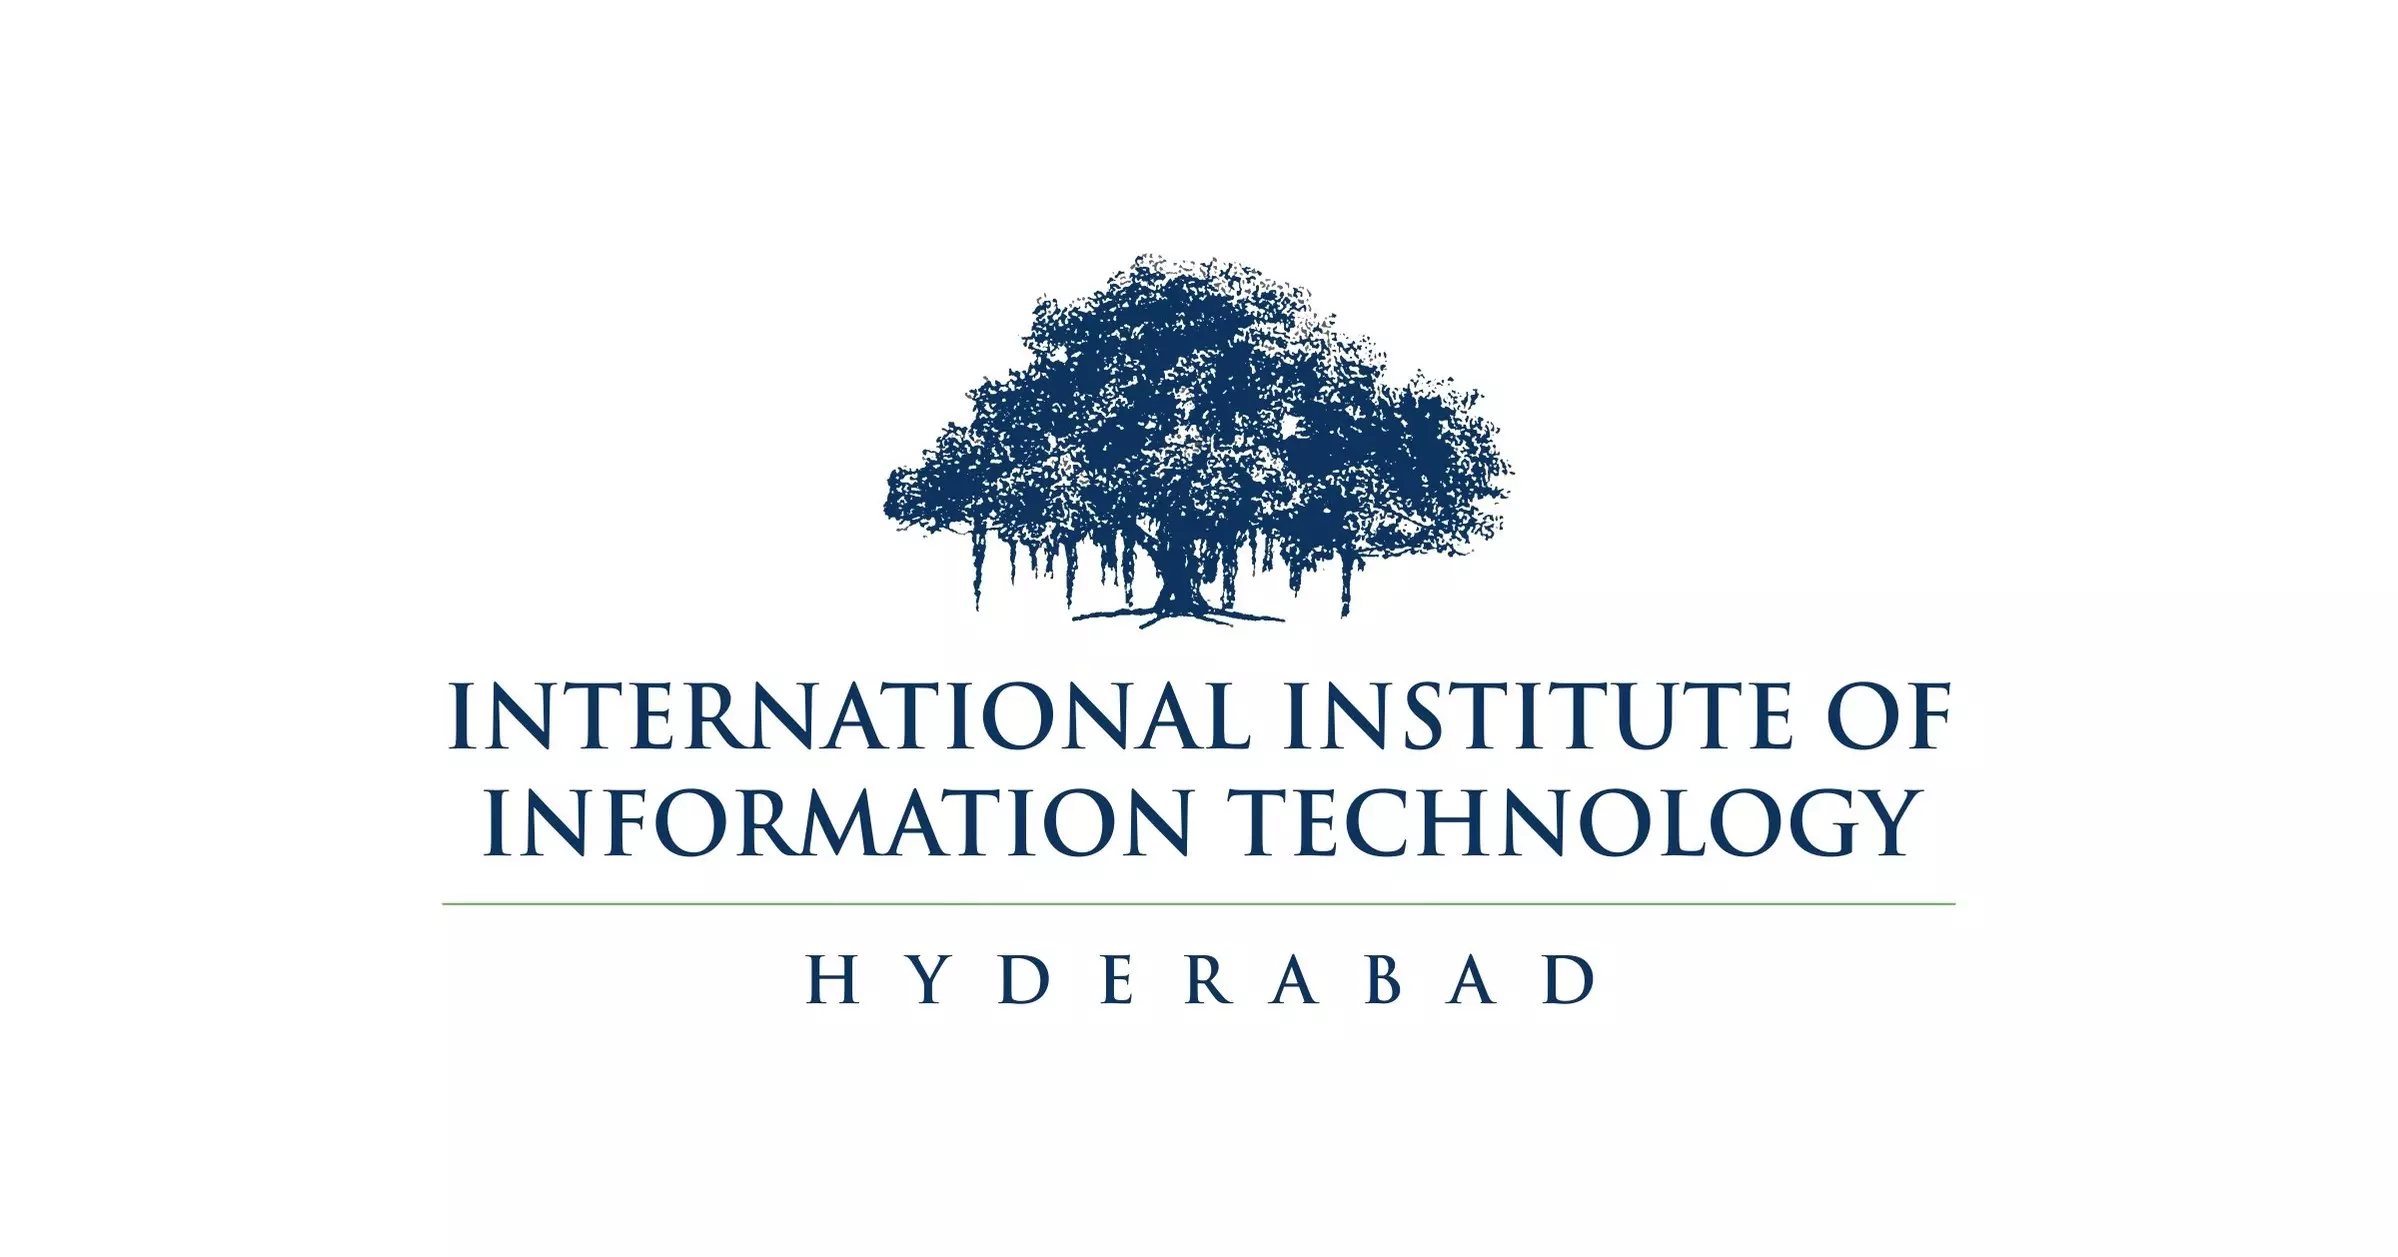 IIIT Hyderabad Develops English Learning Tool for Rural Students